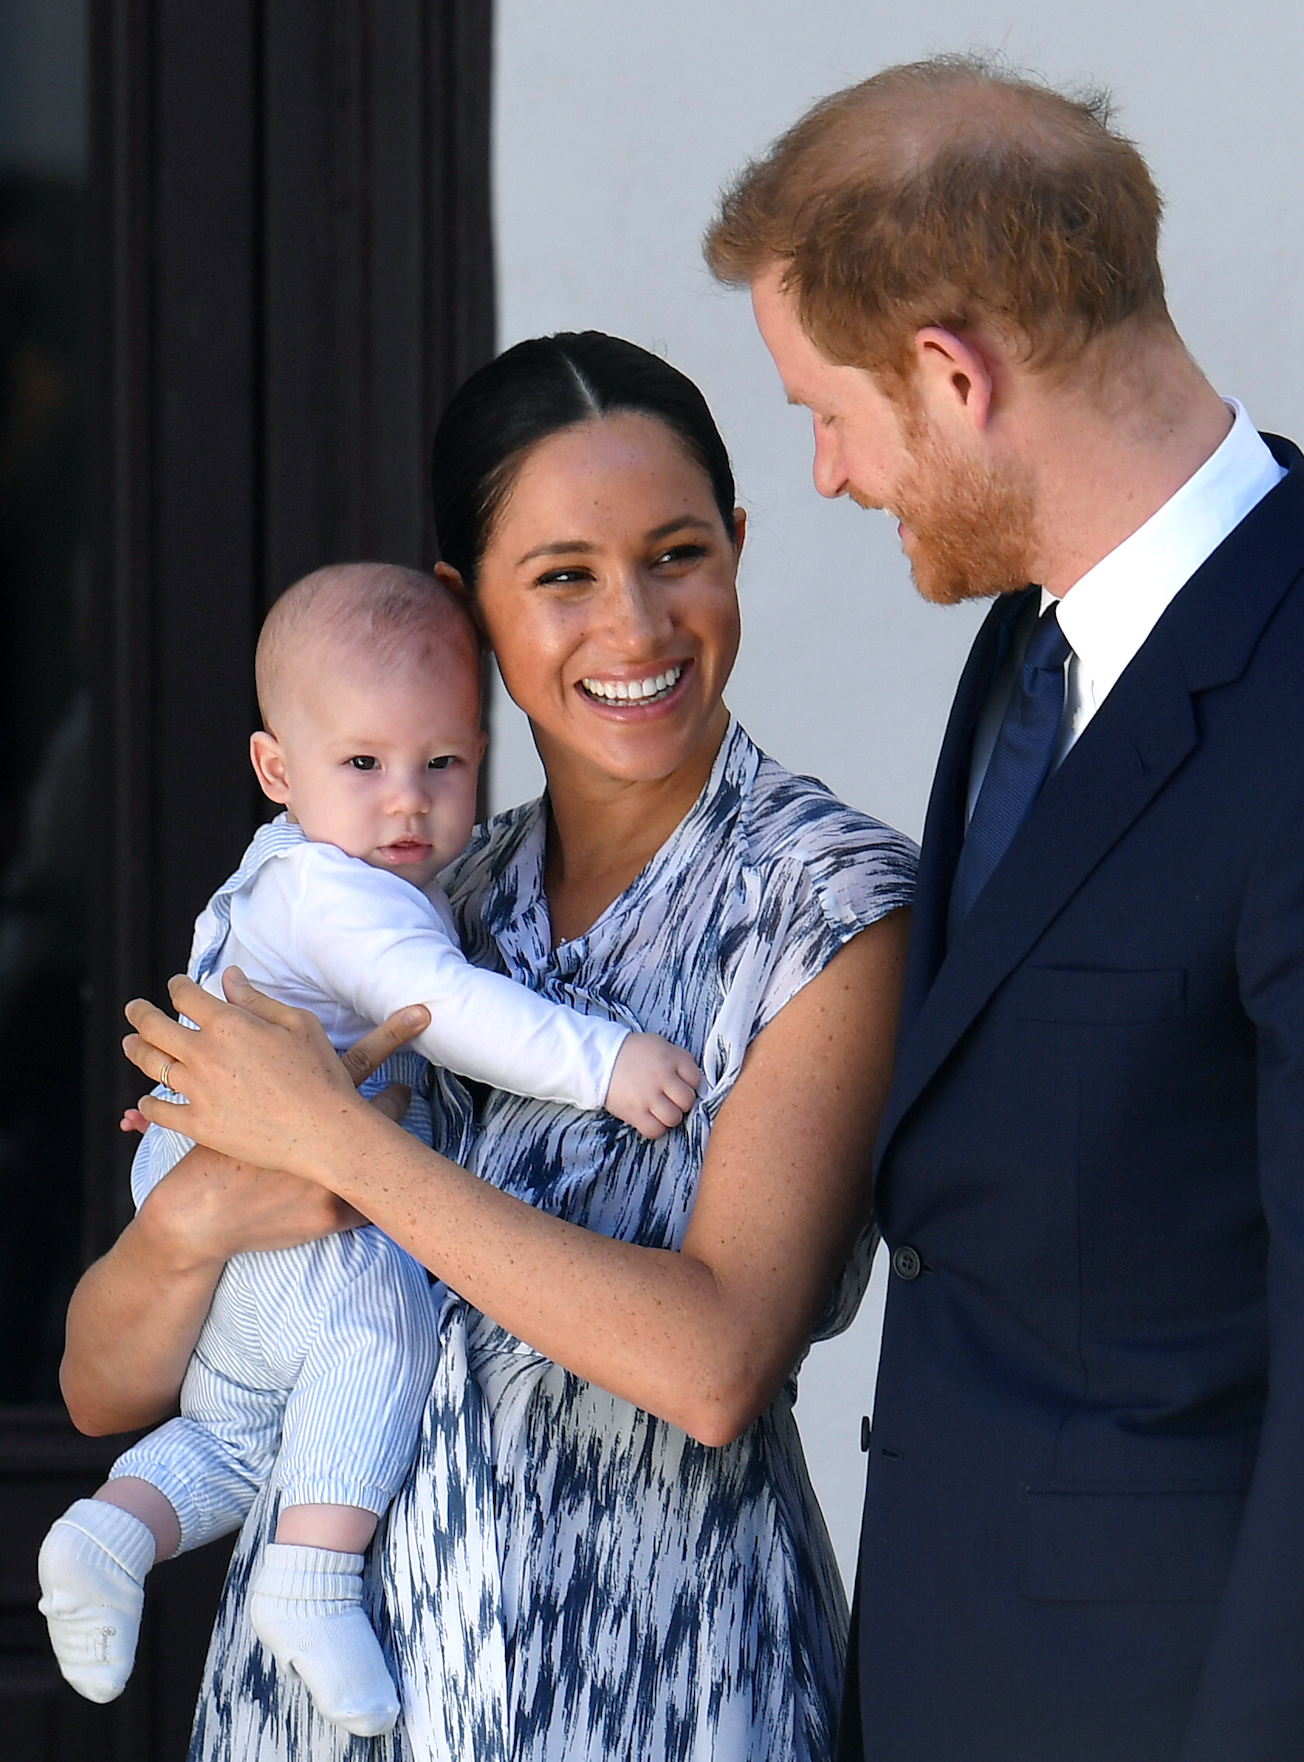 Meghan Markle and Prince Harry on a royal tour of South Africa with Archie Harrison Mountbatten-Windsor